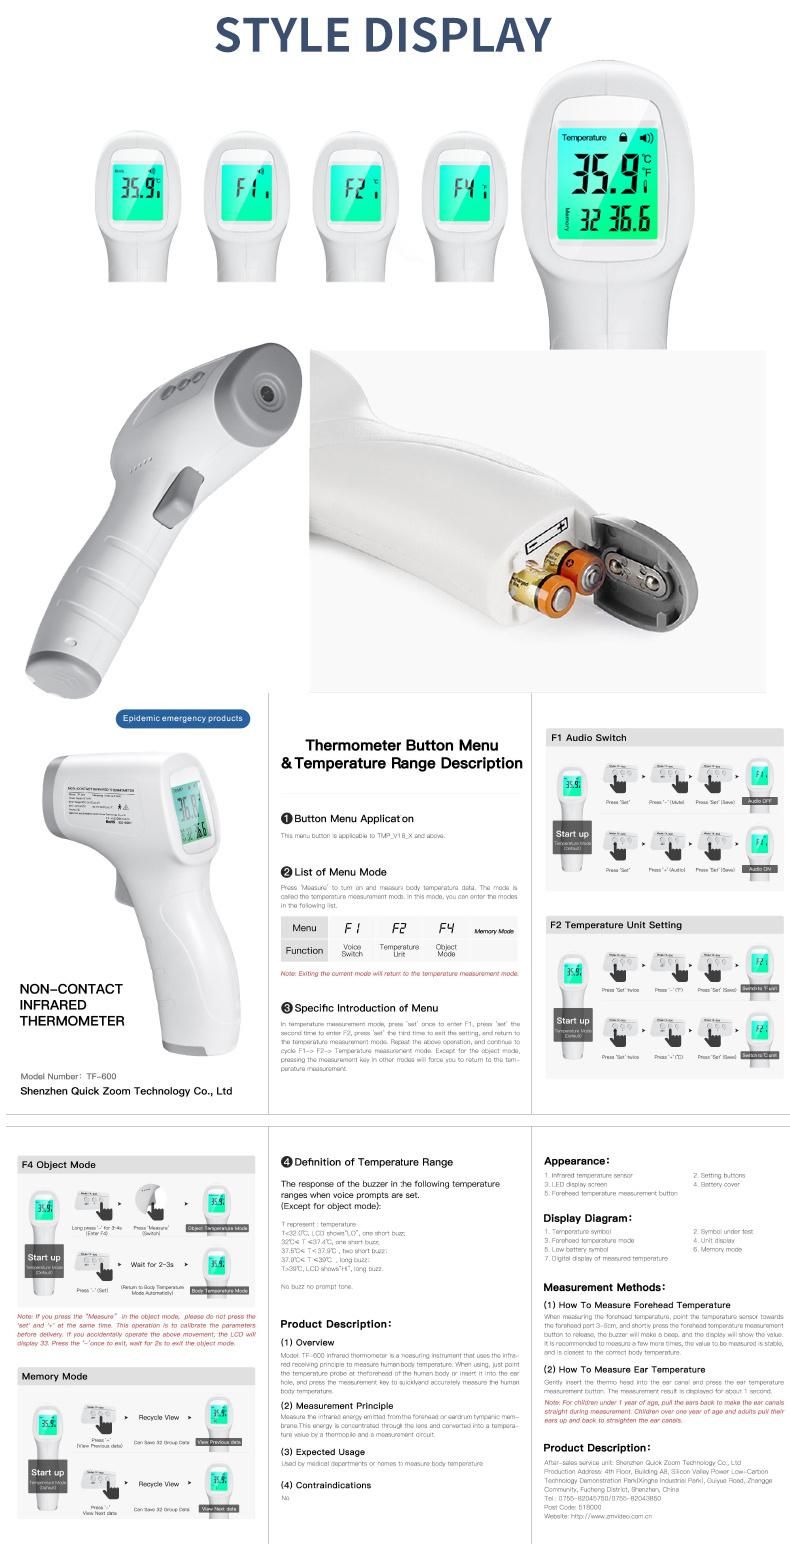 Infrared Thermometer Non-Contact